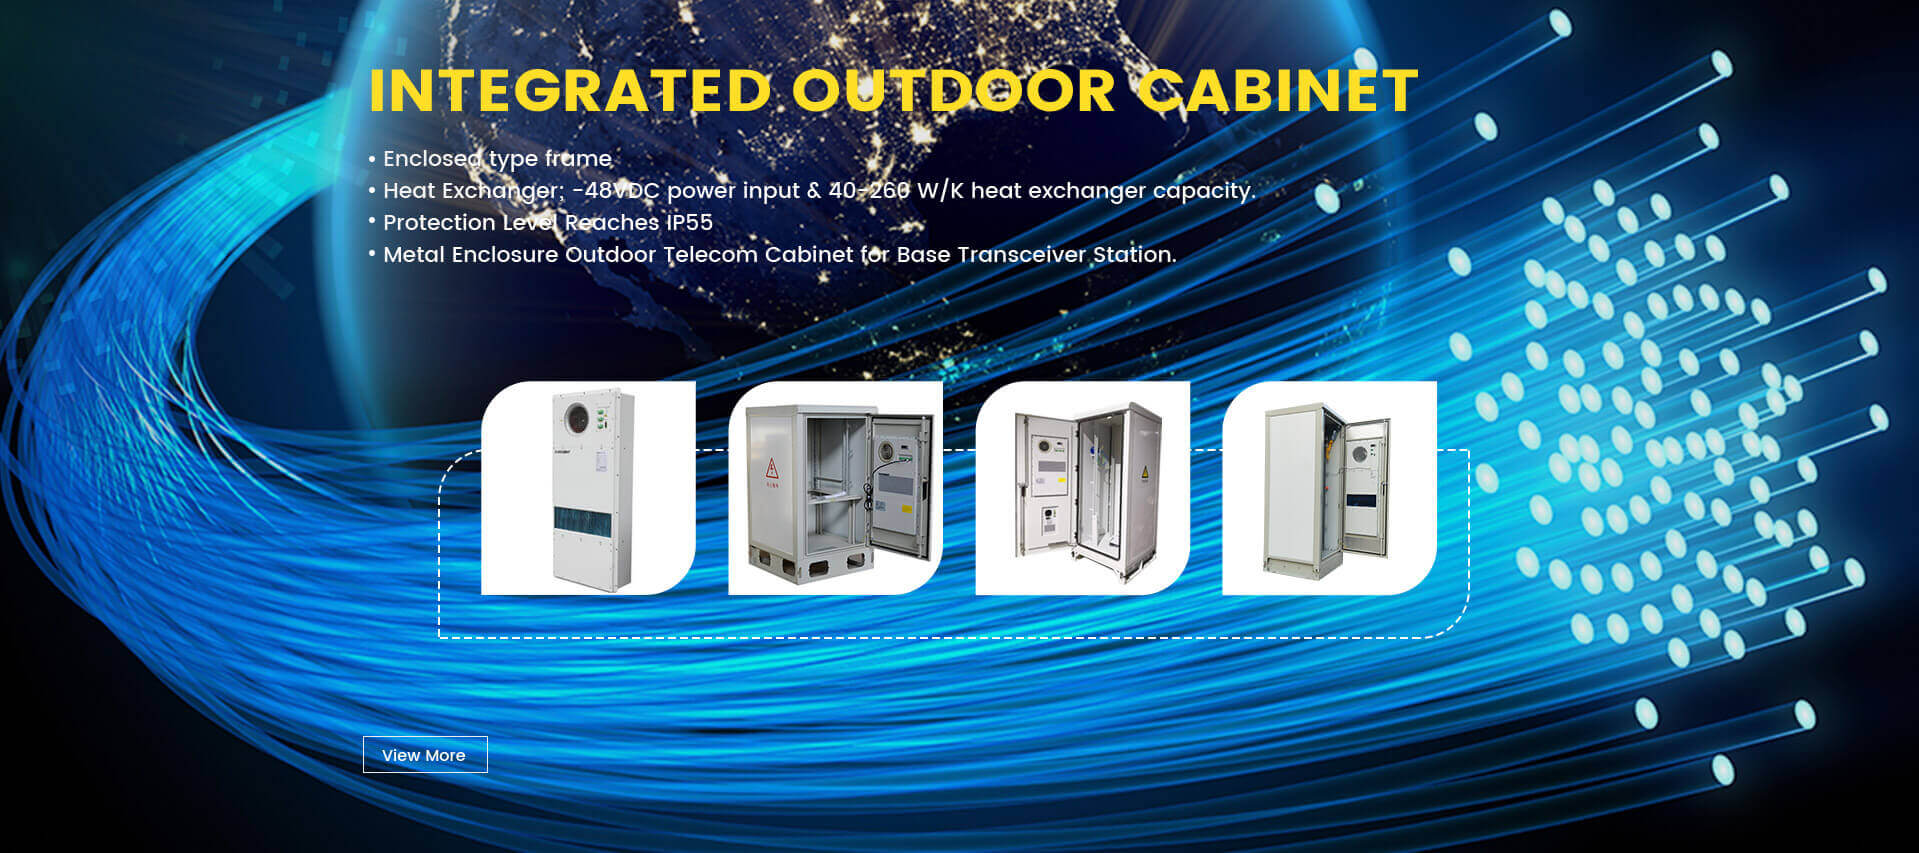 INTEGRATED OUTDOOR CABINET